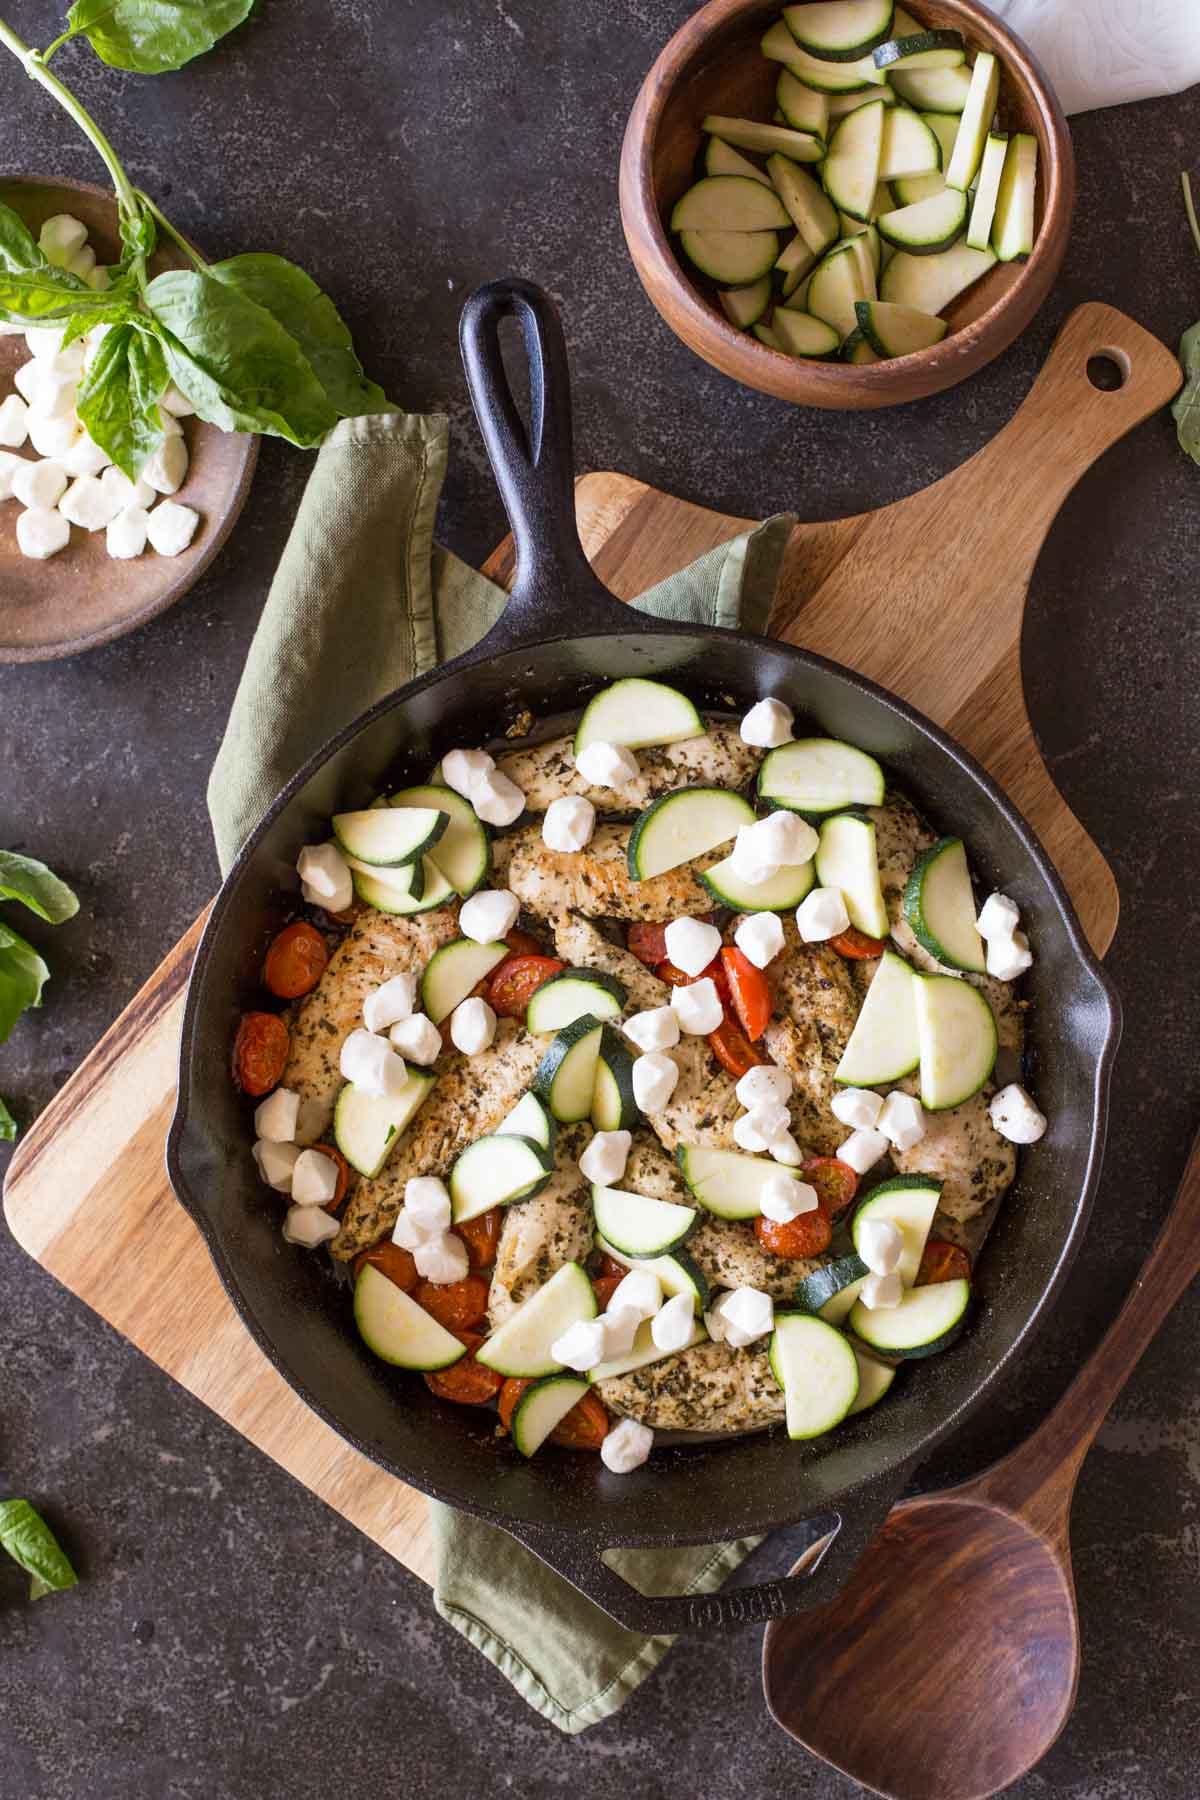 Cooked chicken and caramelized cherry tomatoes in a cast iron skillet, topped with zucchini slices and fresh mozzarella pearls, with some fresh basil, a bowl of sliced zucchini, a bowl of fresh mozzarella pearls and a wooden spoon next to the skillet.